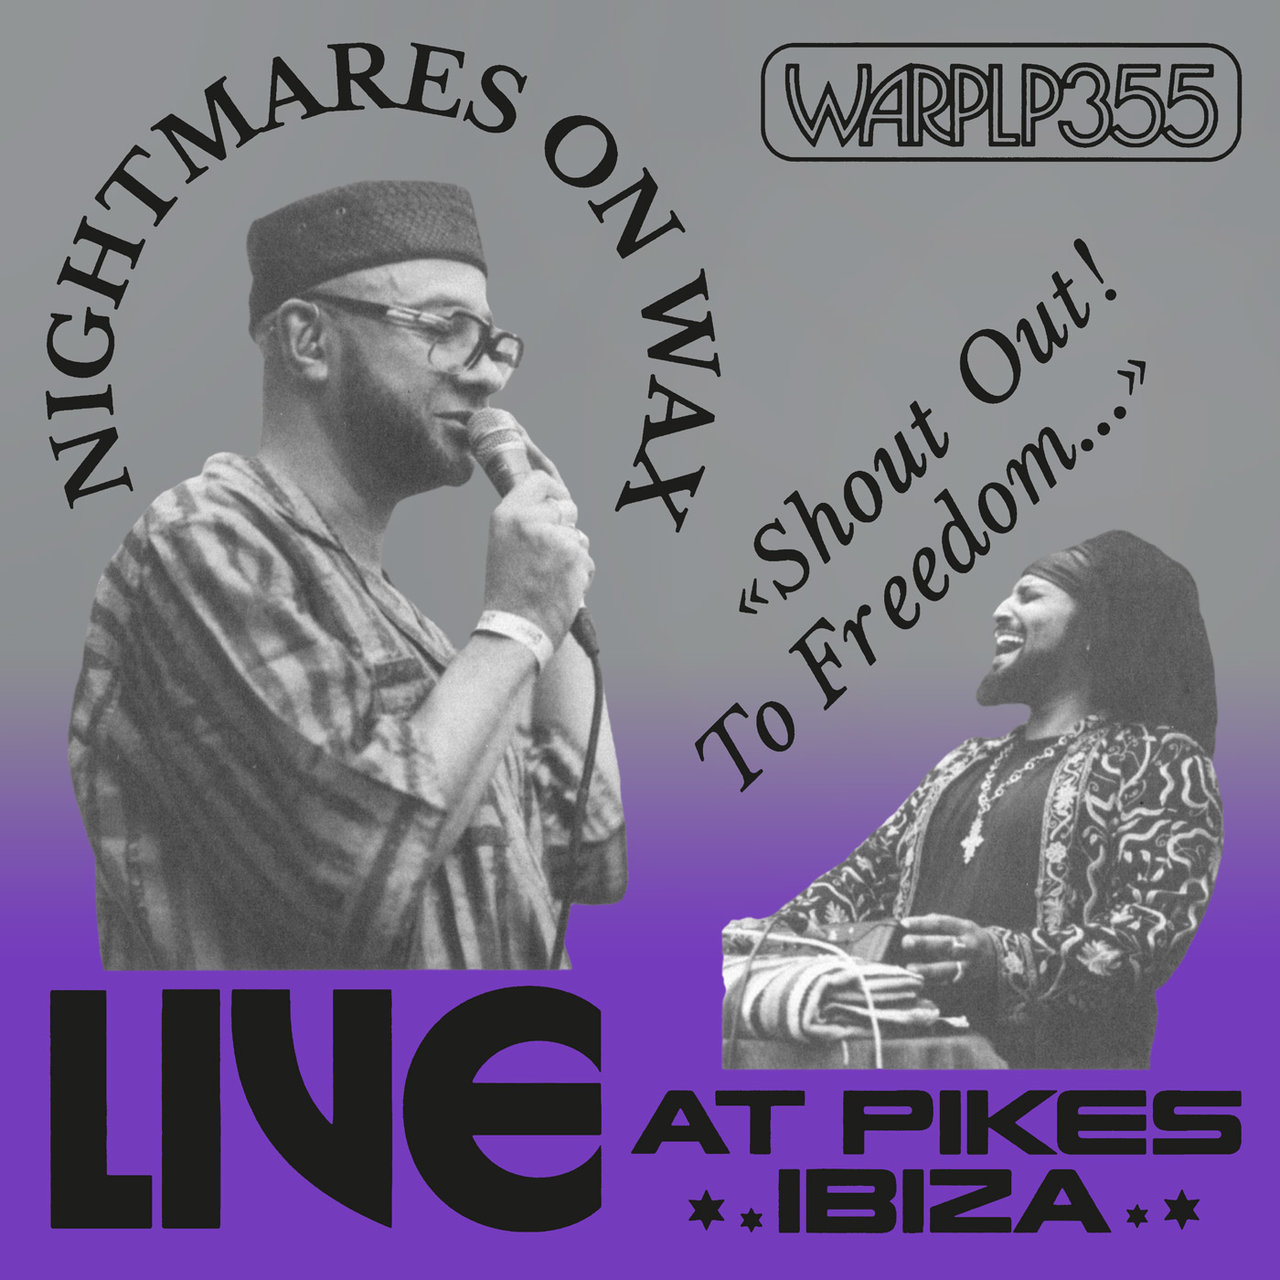 Nightmares On Wax – Shout Out! To Freedom… (Live at Pikes Ibiza)